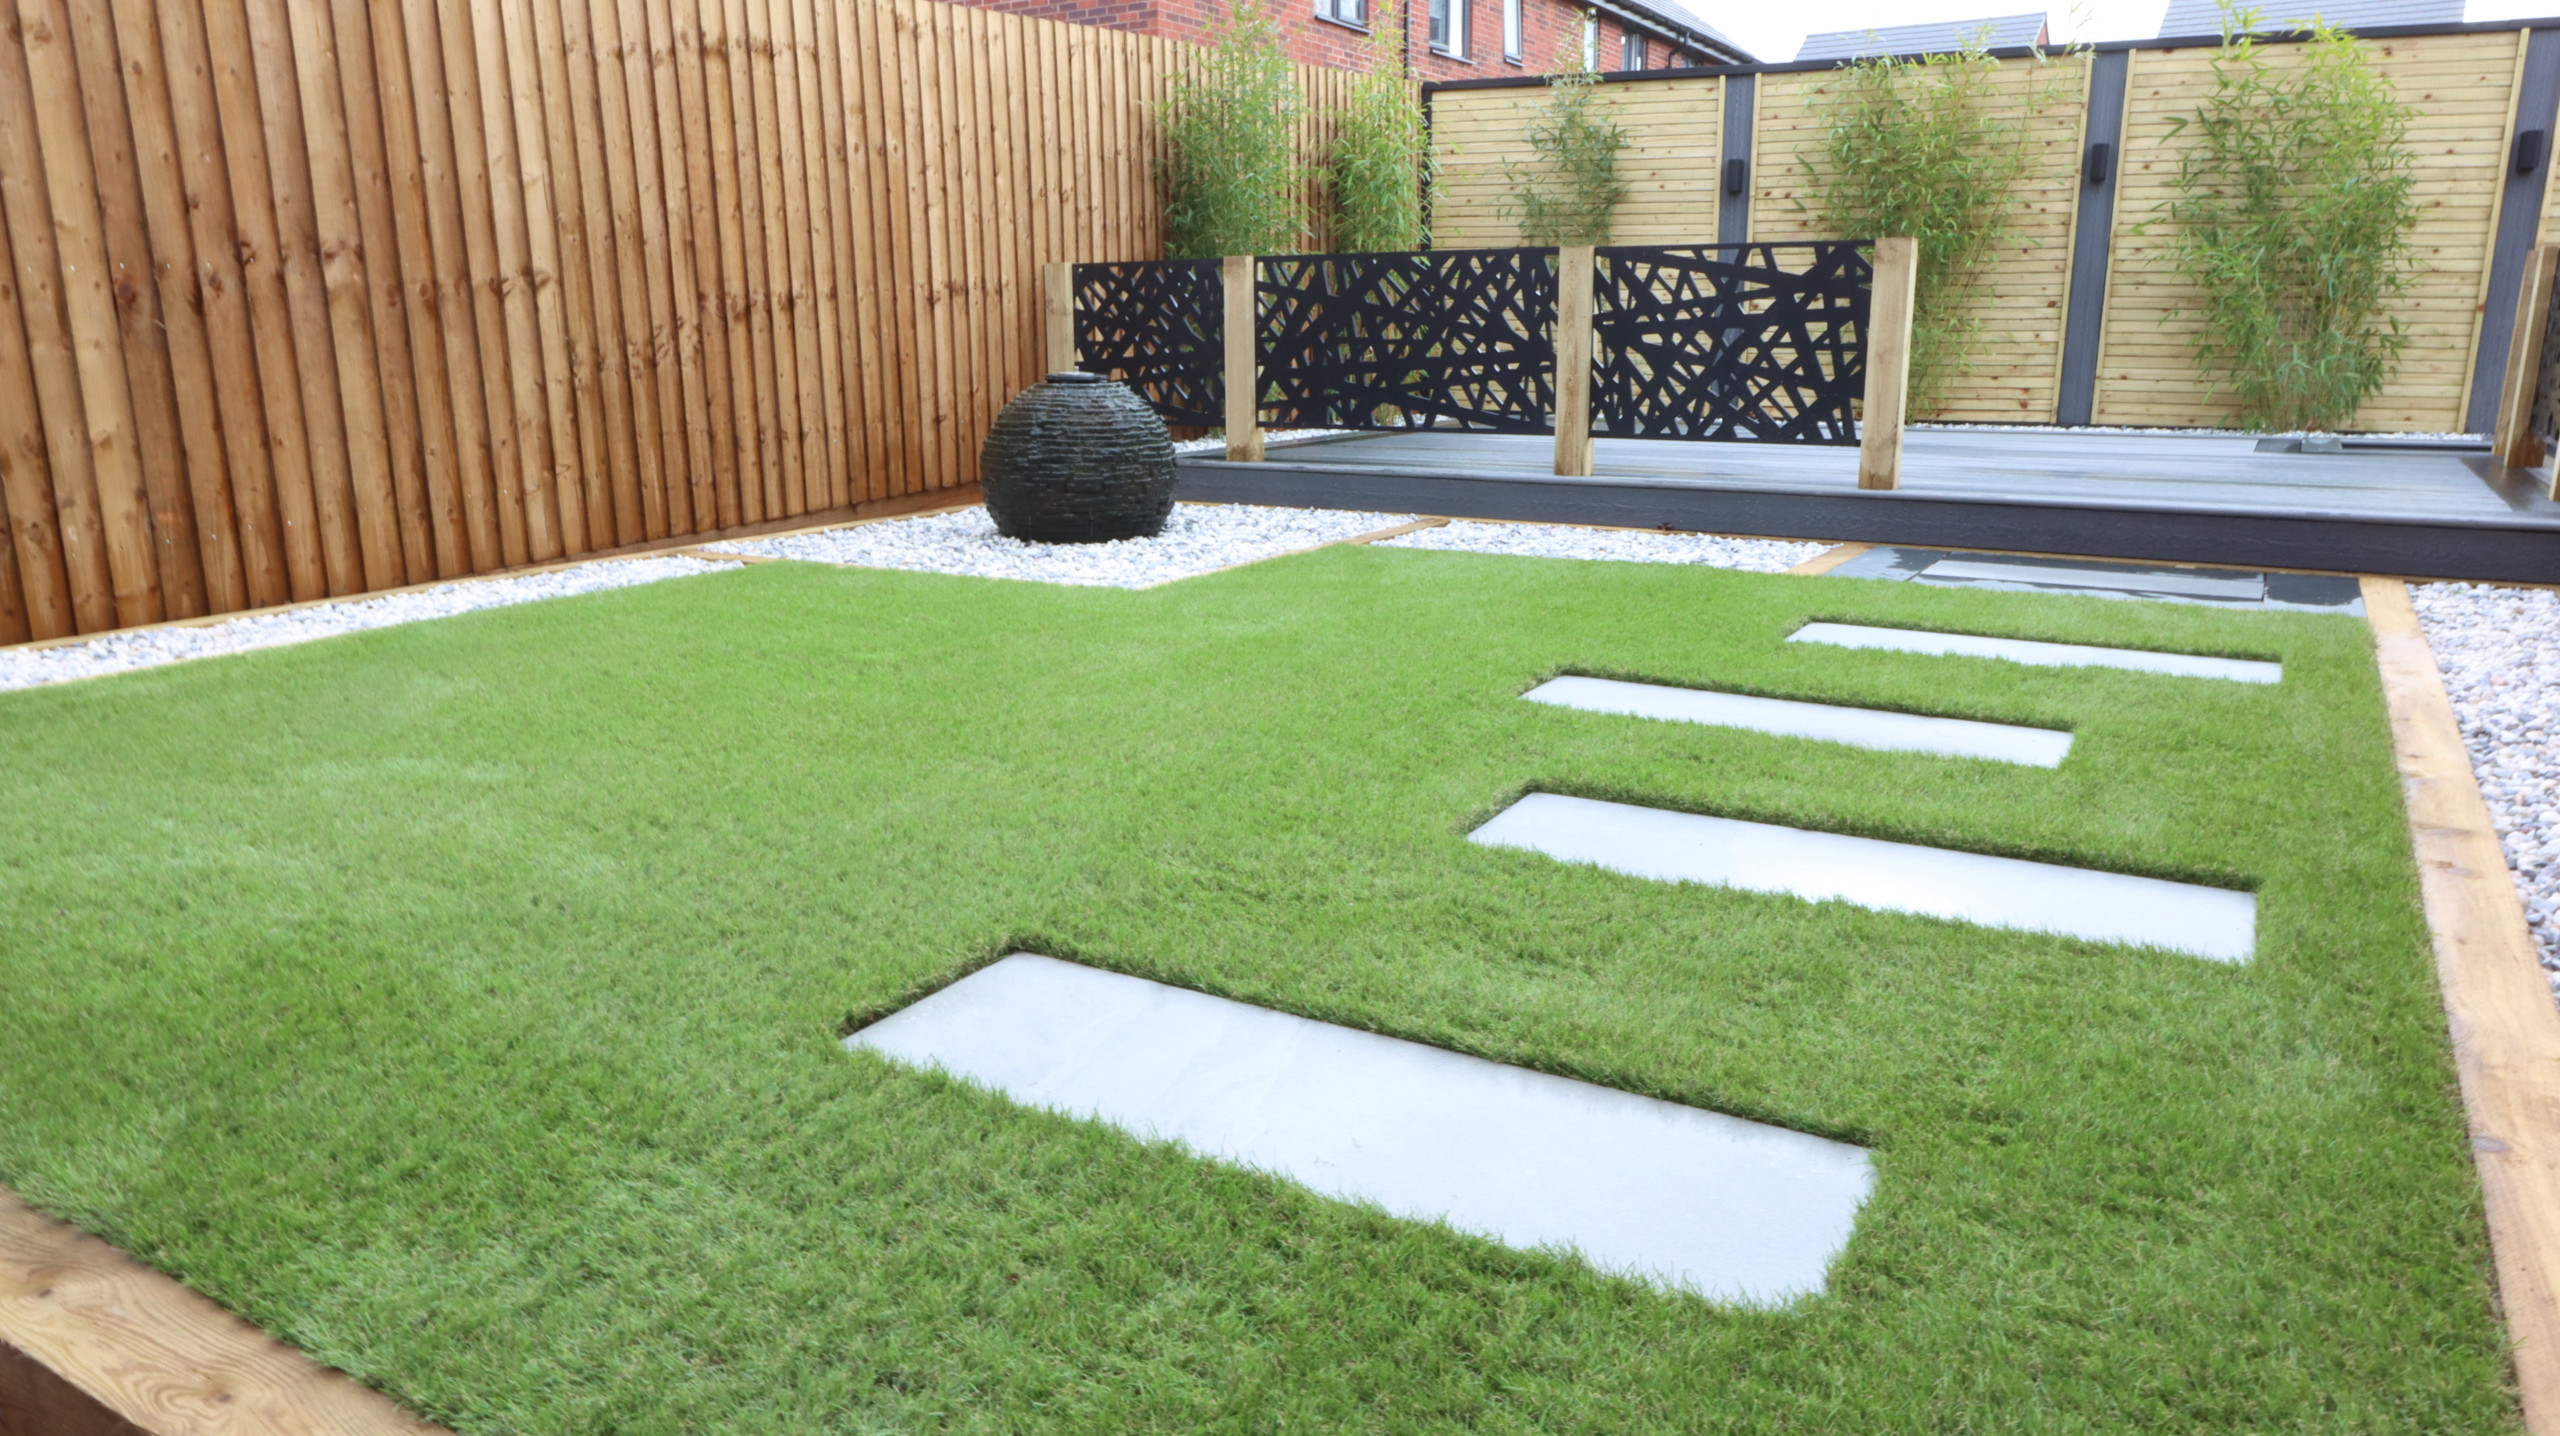 Astro turf with stepping stones